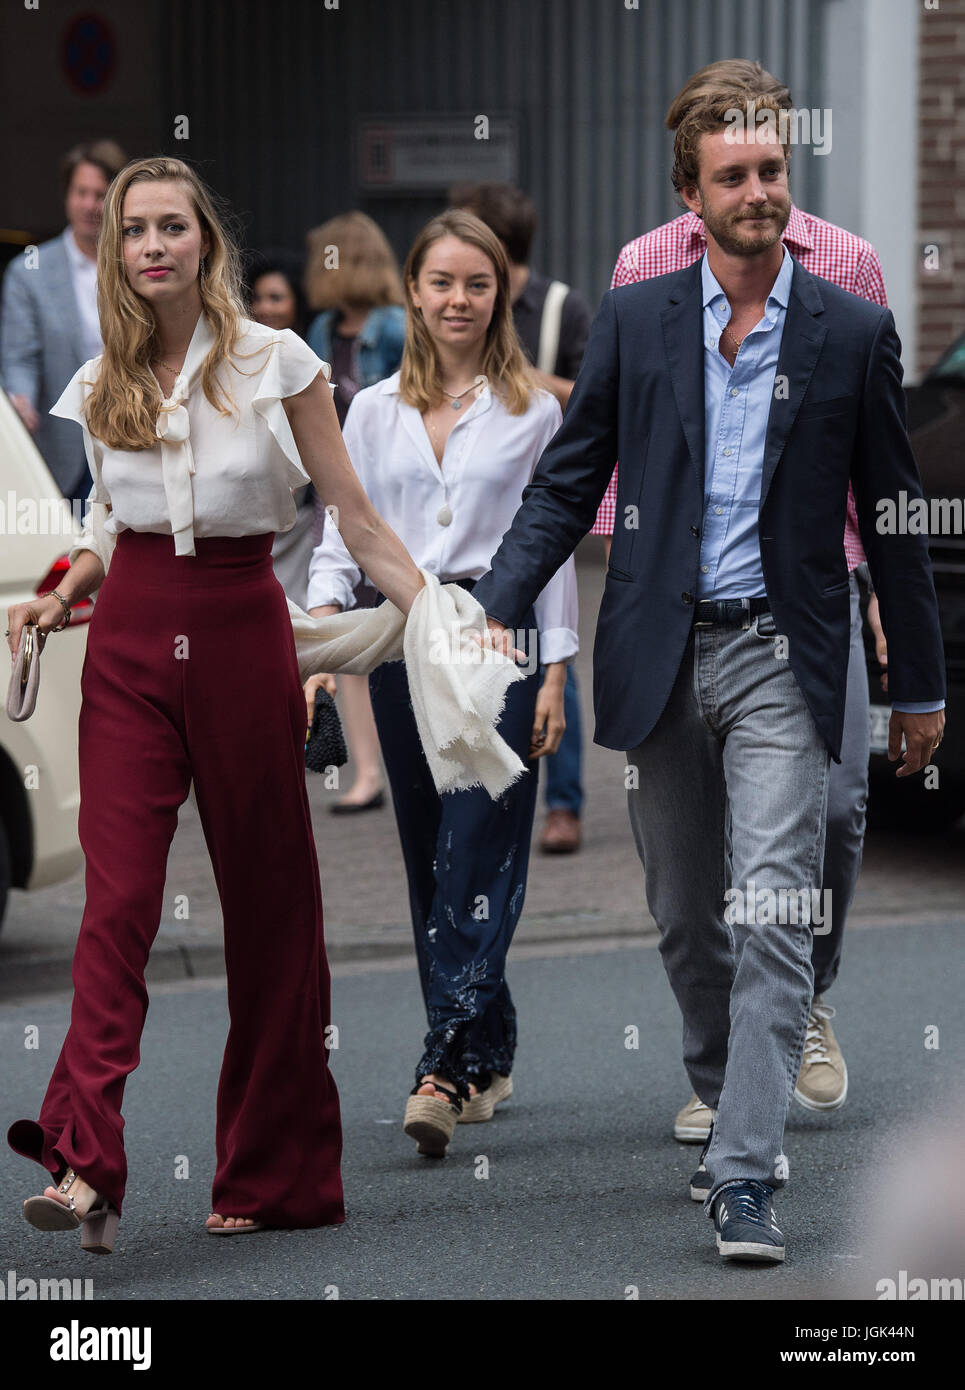 Pierre Casiraghi, son of Princess Caroline, his wife, Duchess Beatrice Boromeo (l) and his sister Princess Alexandra of Hanover arrive at the Brauhaus Ernst August berwery in Hanover, Germany, 7 July 2017. Prince Ernst August of Hanover of the House of Welf celebrates his wedding-eve party at the brewery. Photo: Silas Stein/dpa Stock Photo